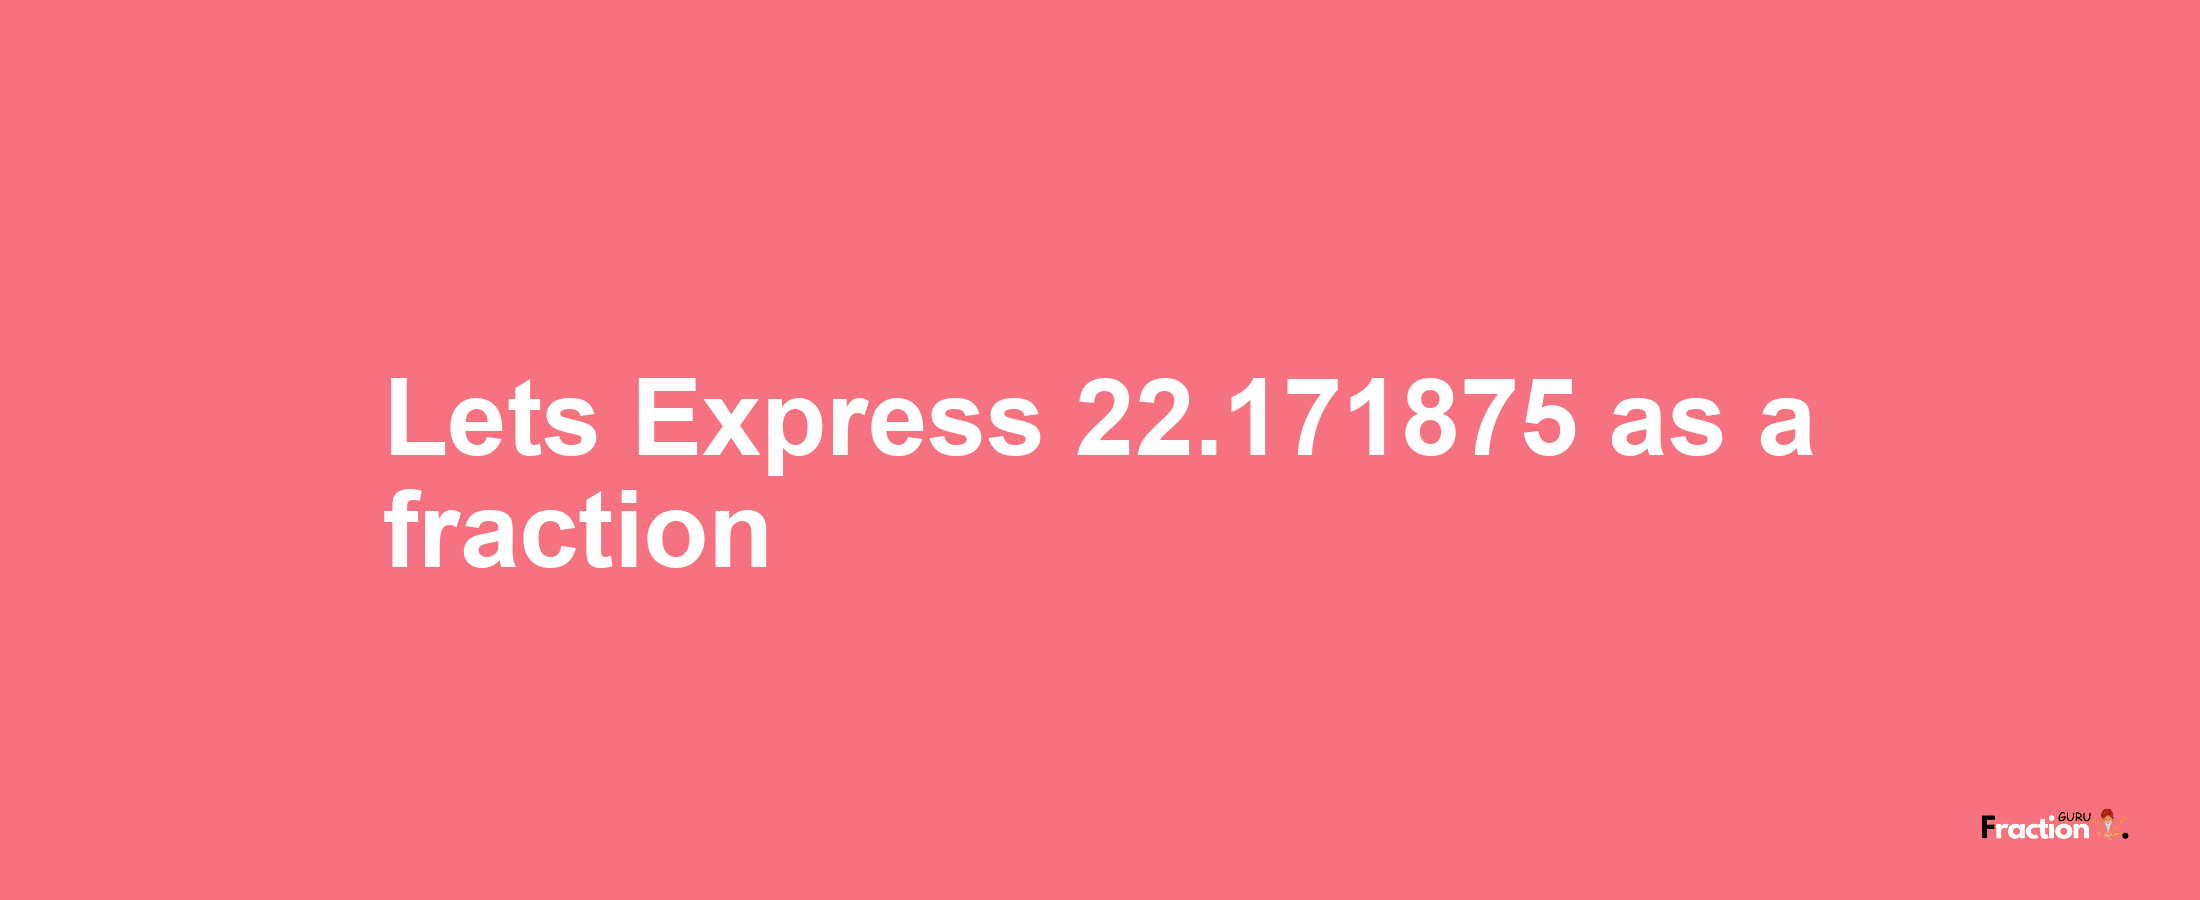 Lets Express 22.171875 as afraction